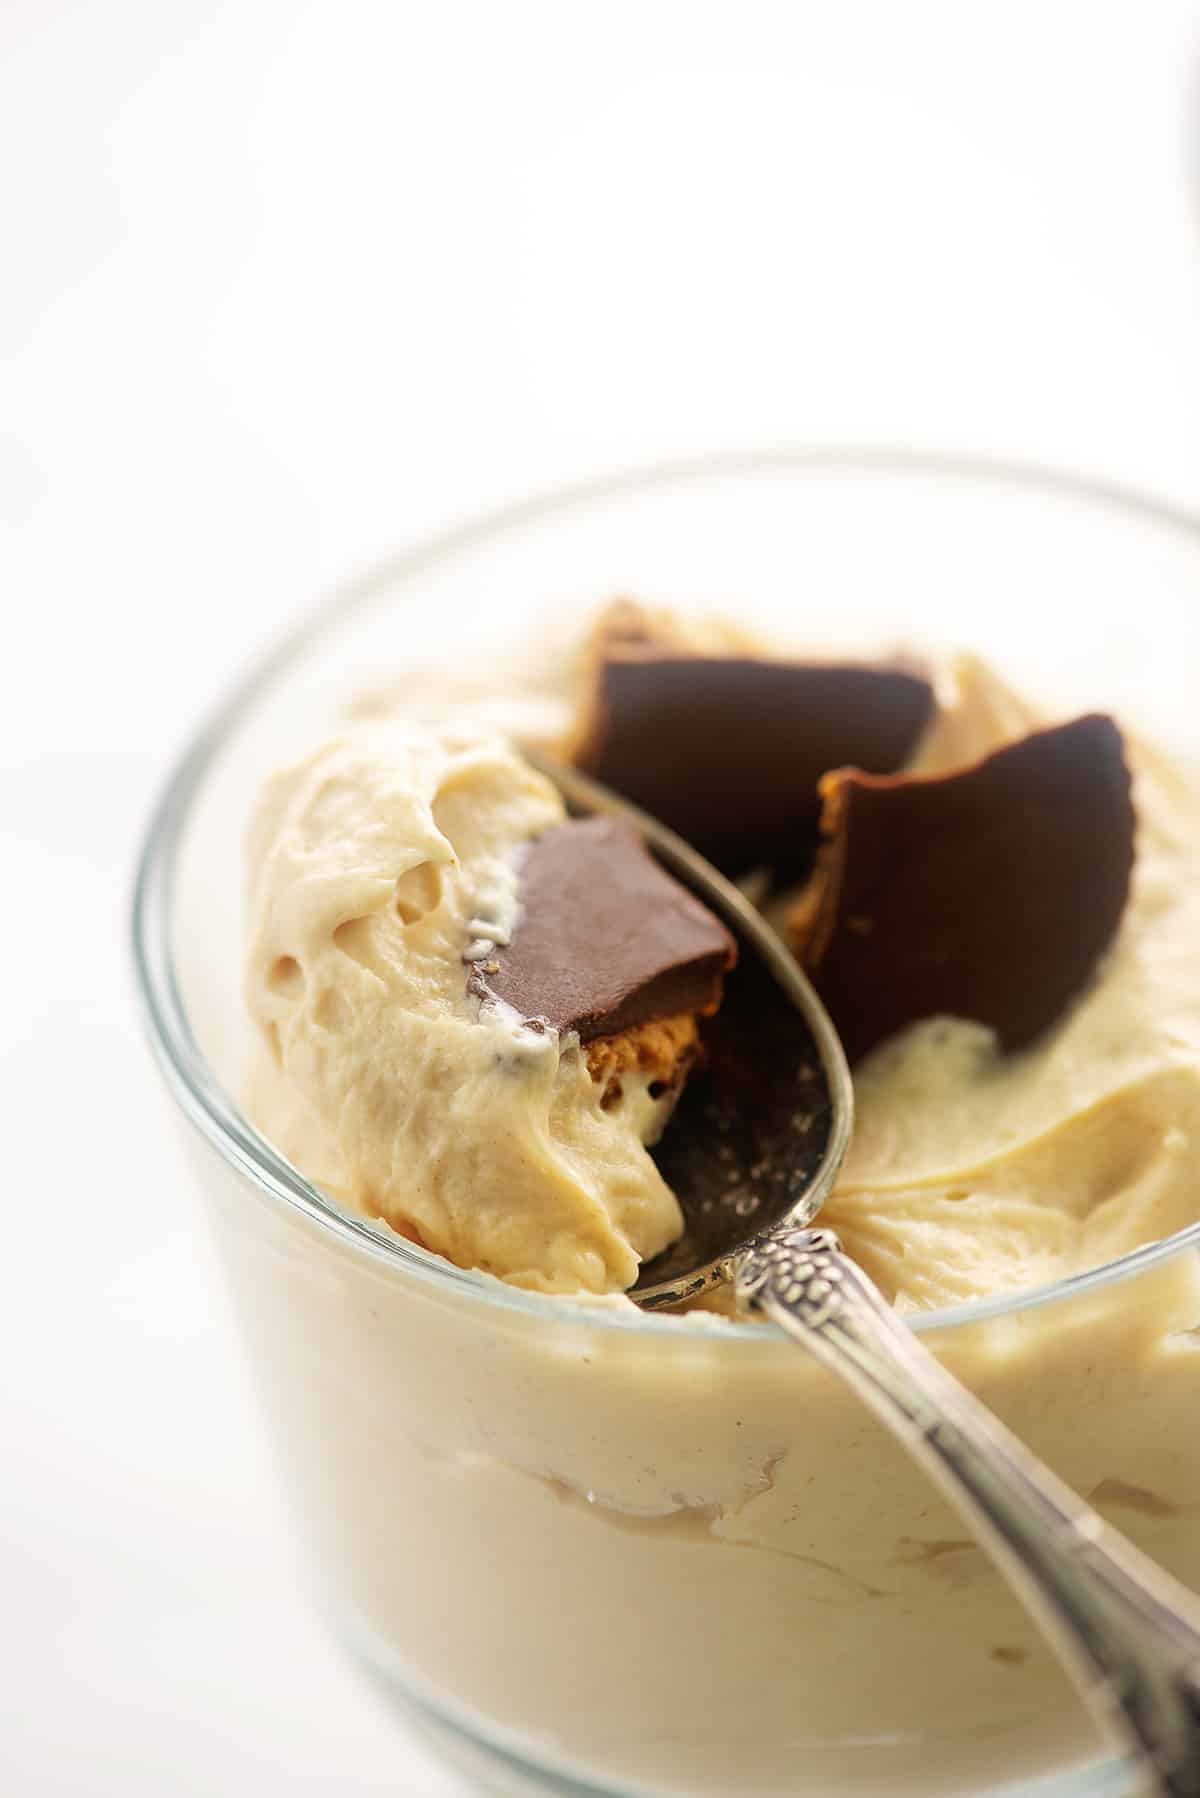 creamy peanut butter mousse in glass dish with spoon.